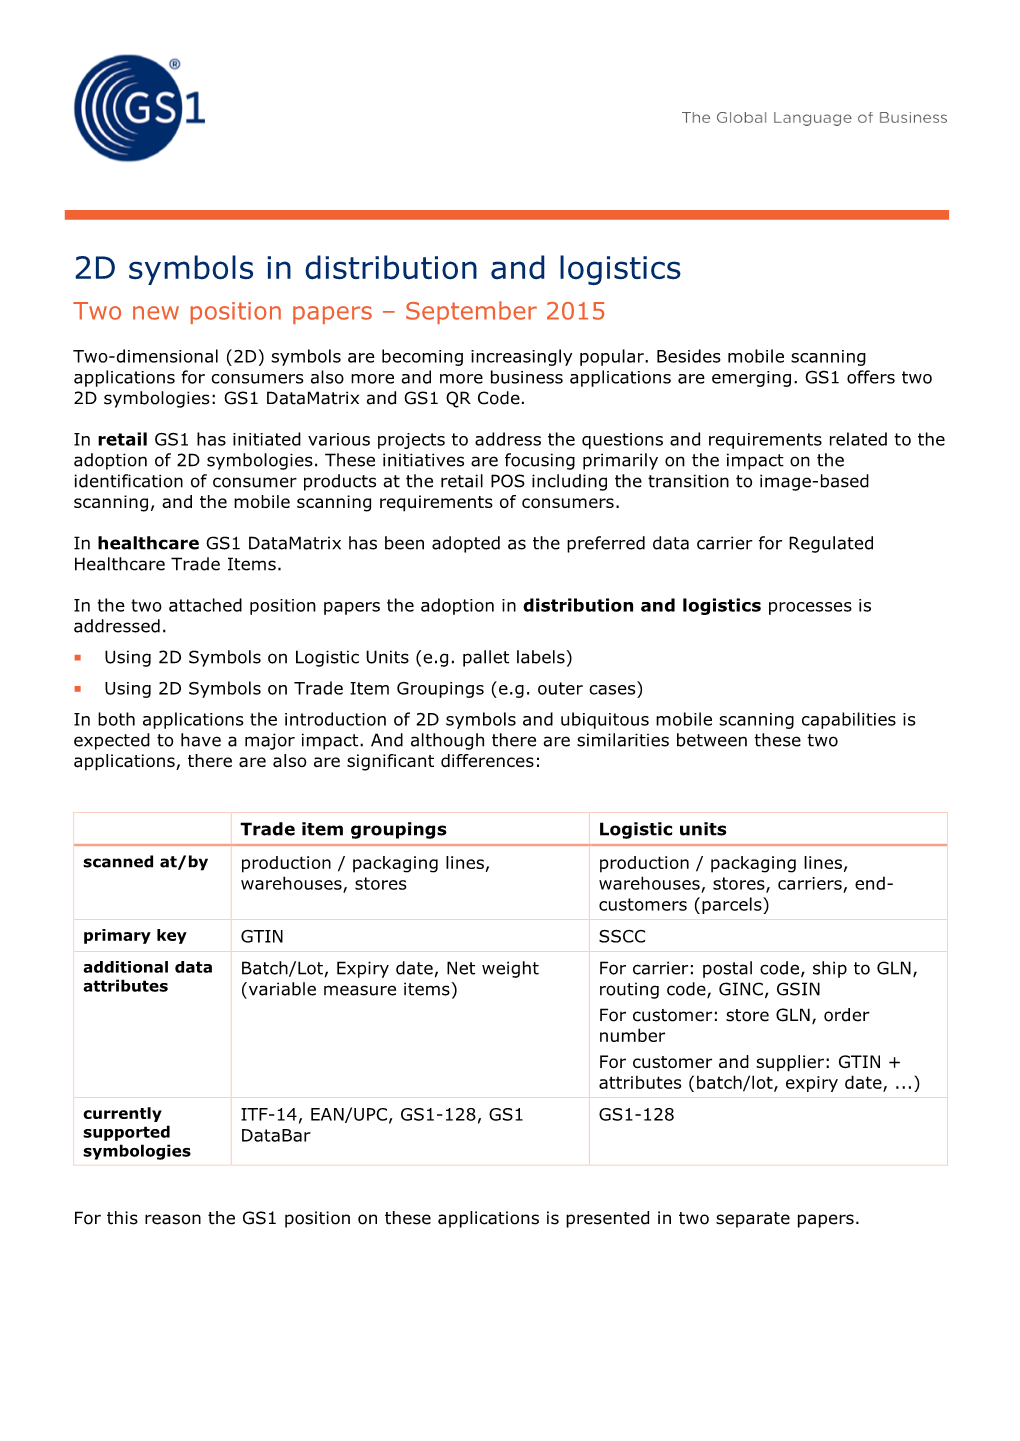 Using 2D Symbols in Distribution and Logistics